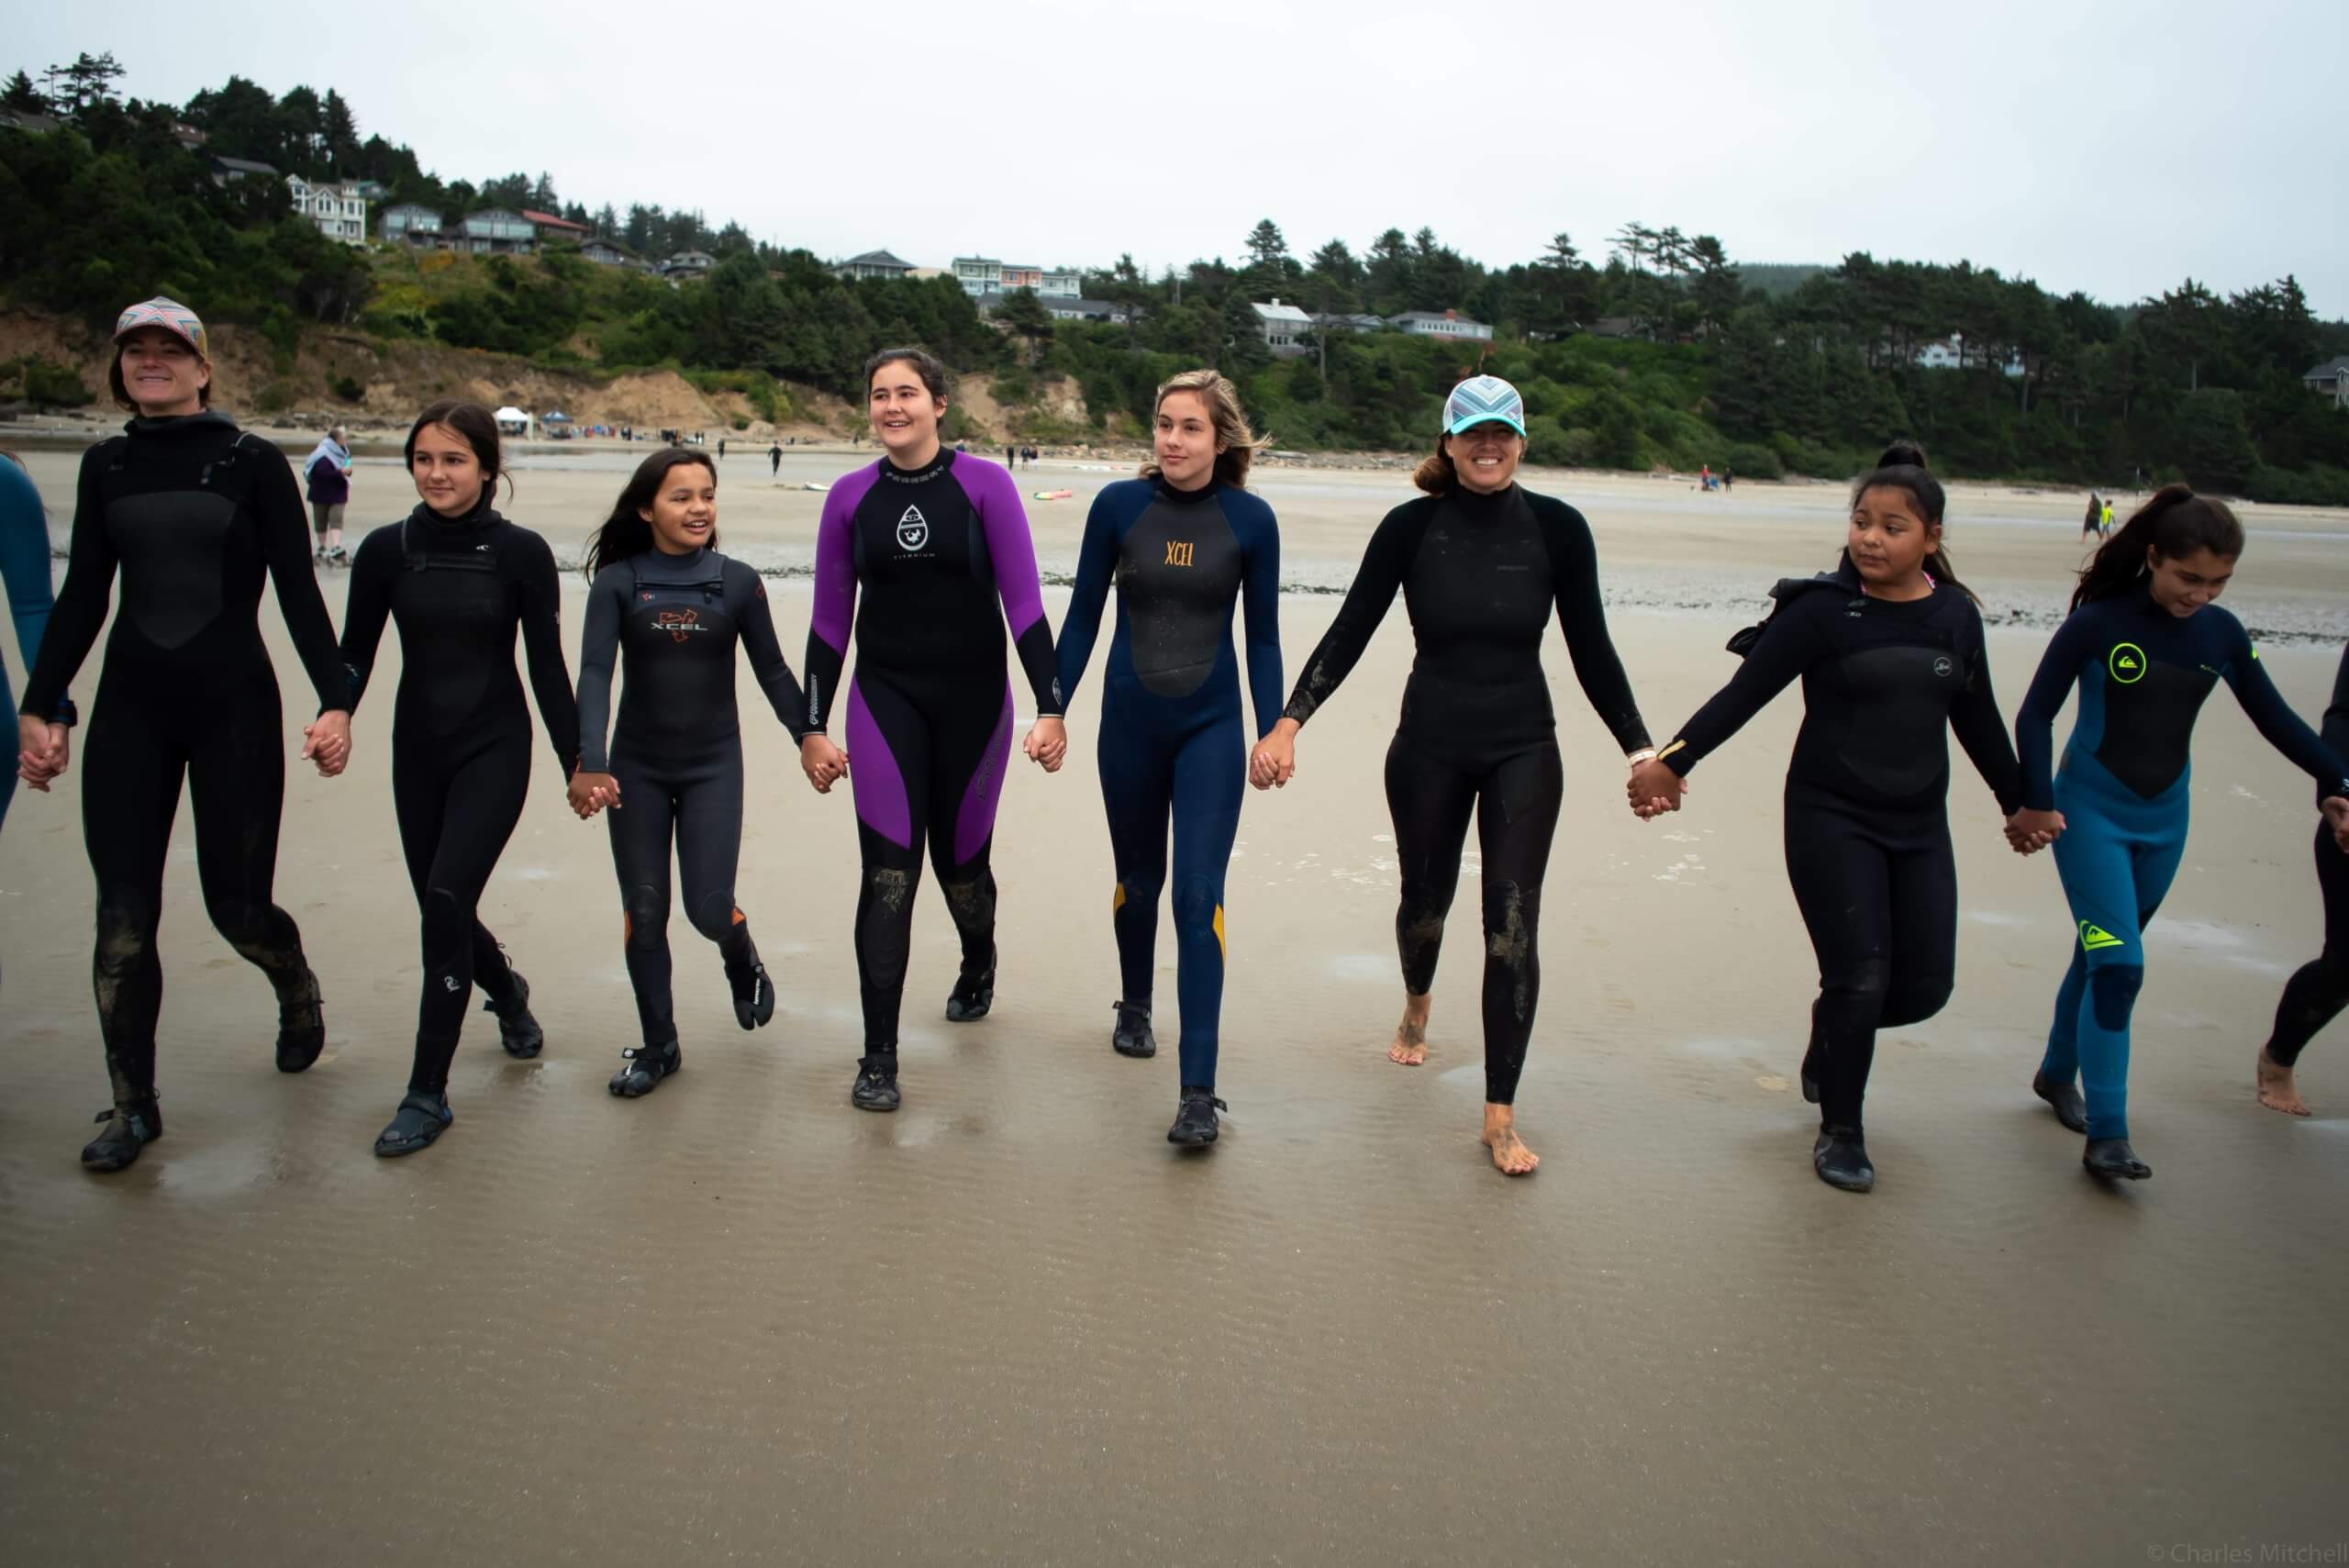 Women and girls in wetsuits holding hands and walking on the beach together.